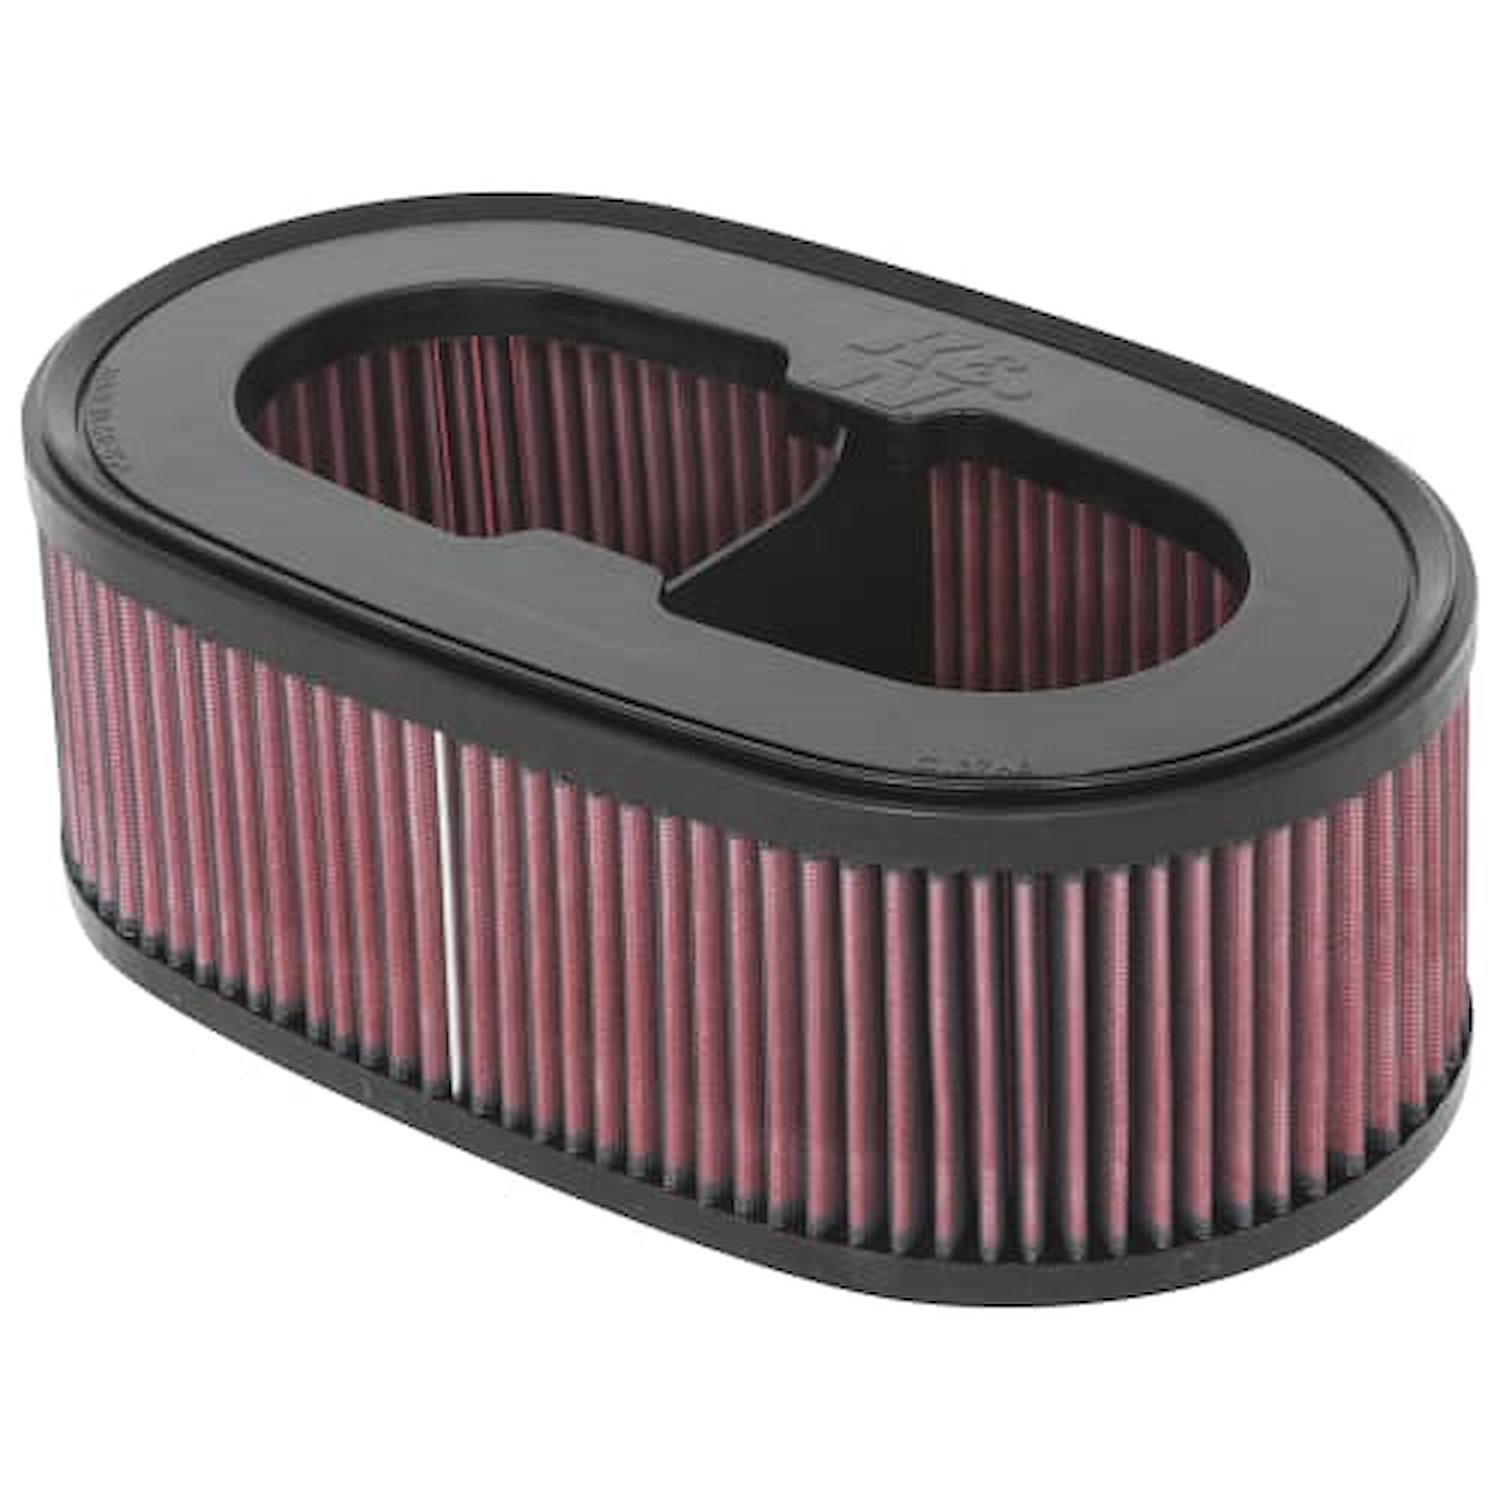 High-Performance OE-Style Replacement Filter for Chevy Corvette